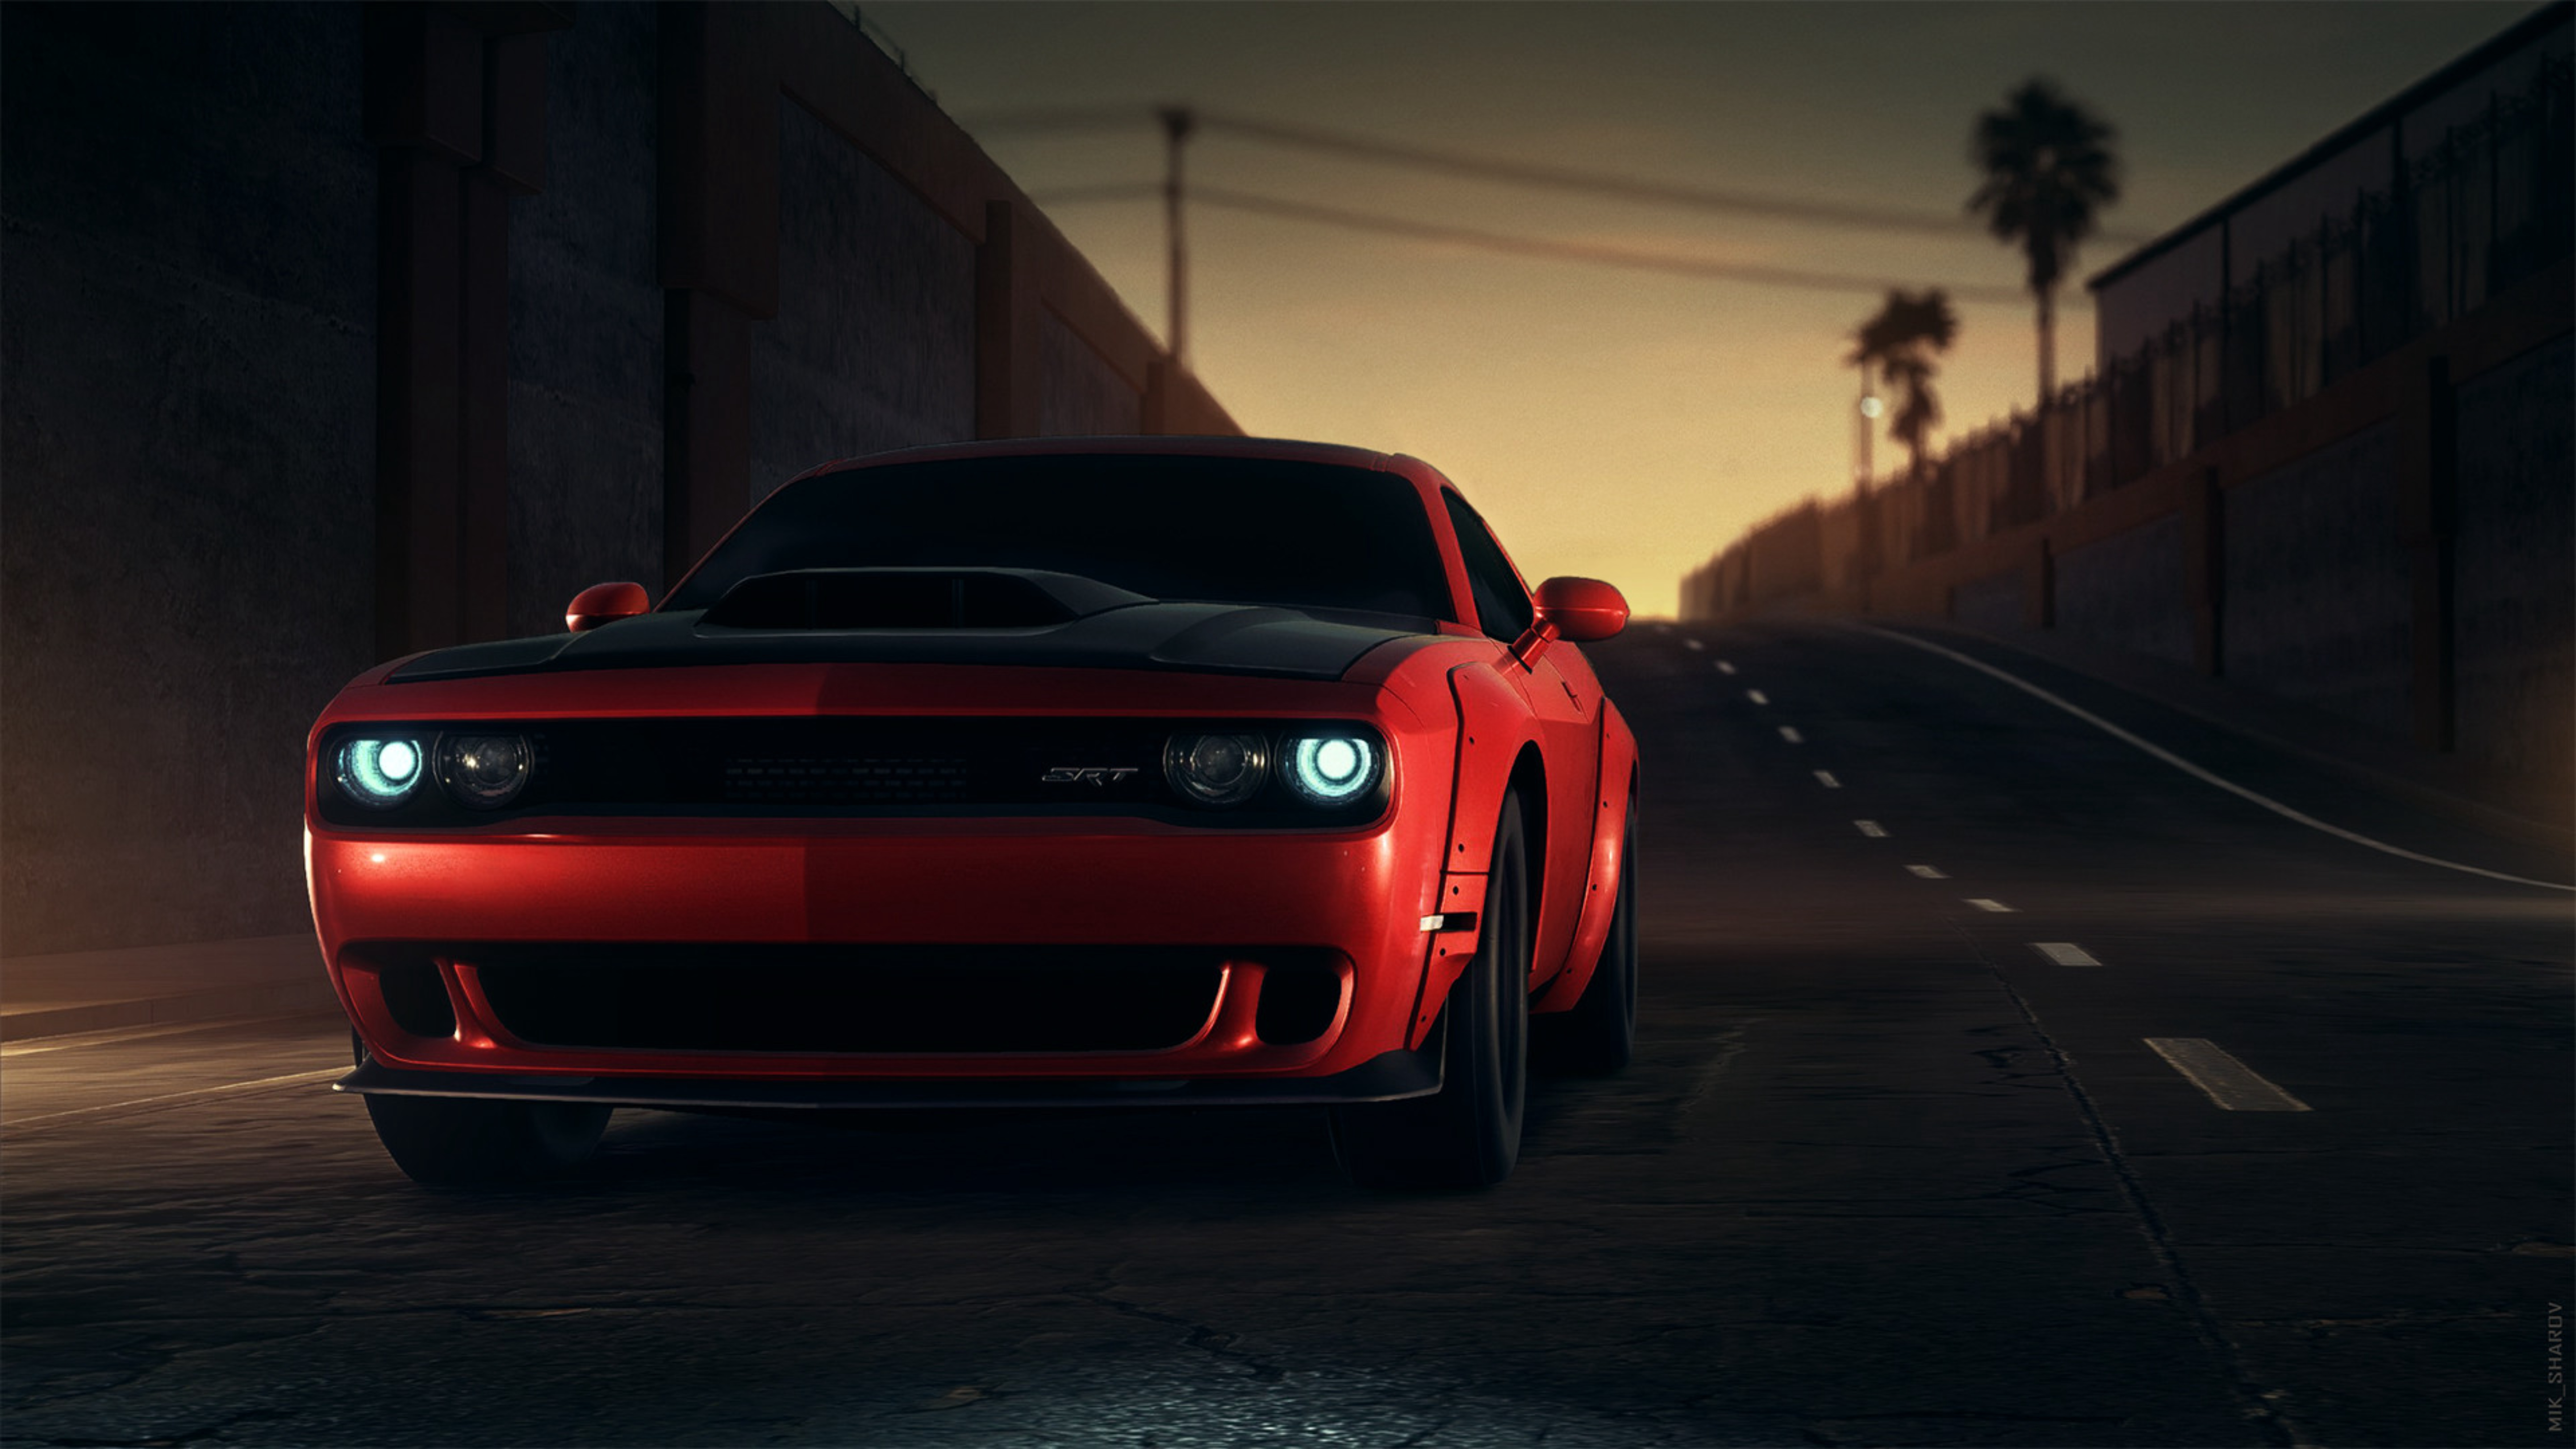 cars, front view, headlights, sports car, lights, dodge srt, dodge, red, sports cellphone